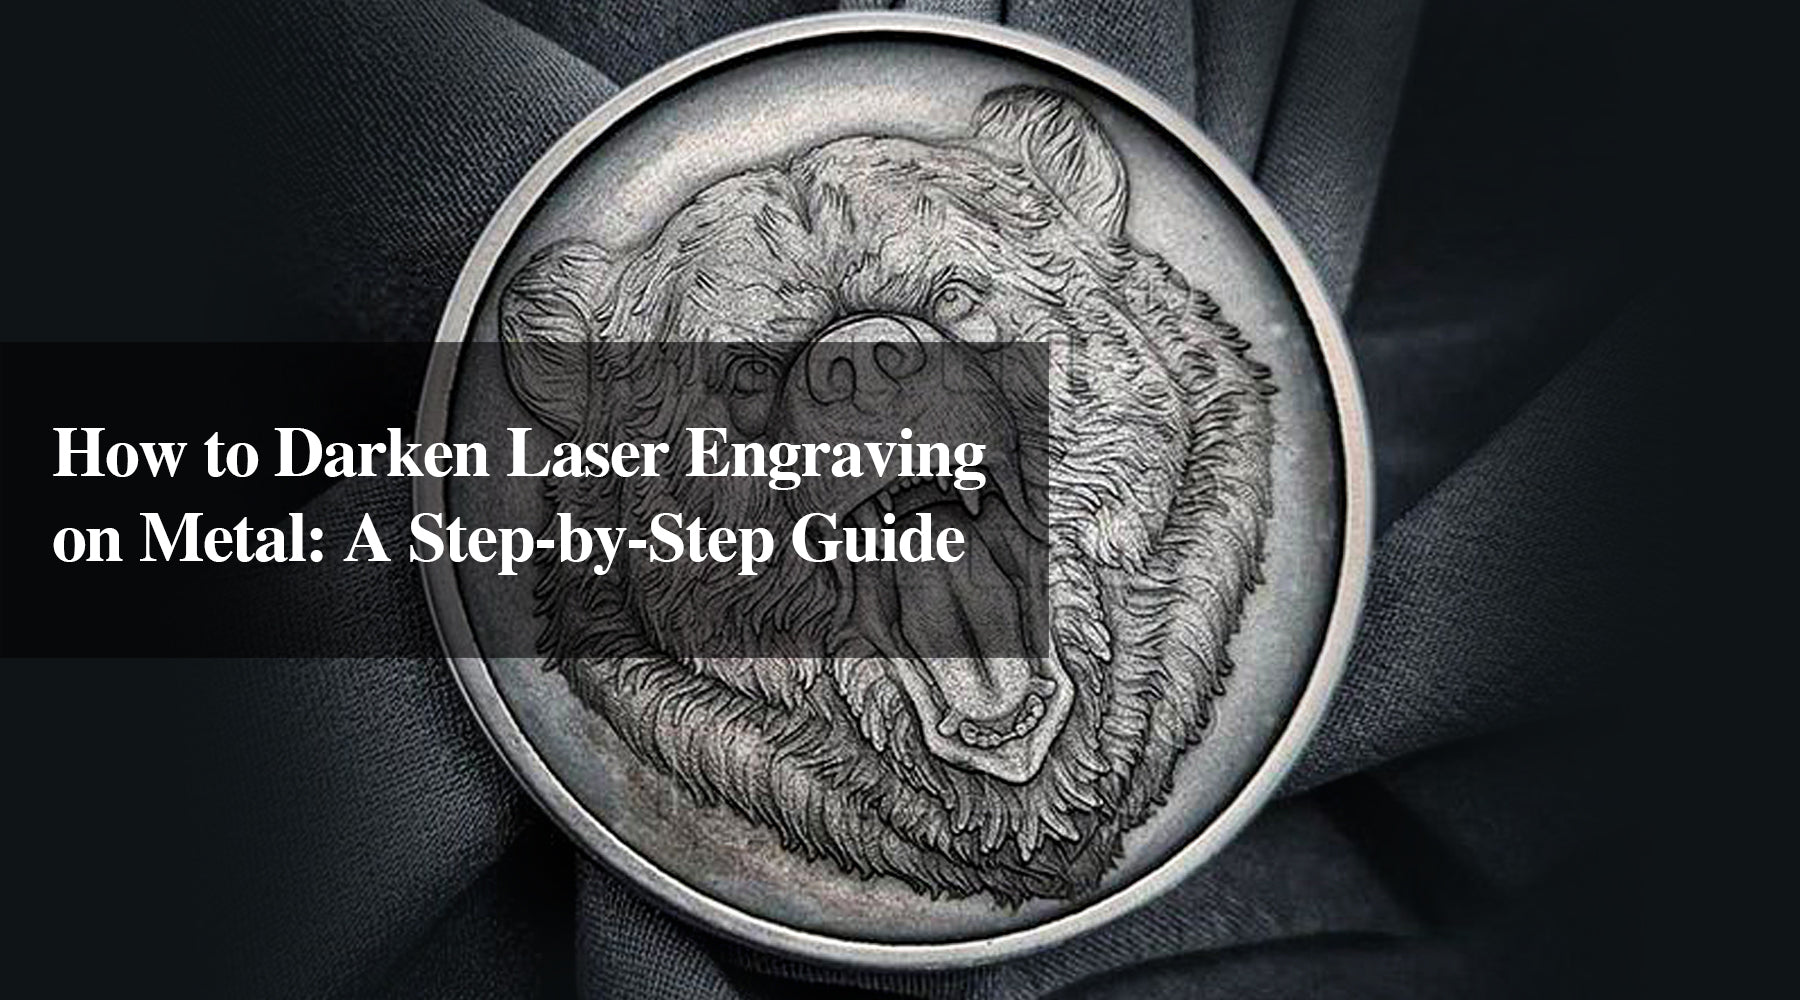 How to Darken Laser Engraving on Metal: A Step-by-Step Guide